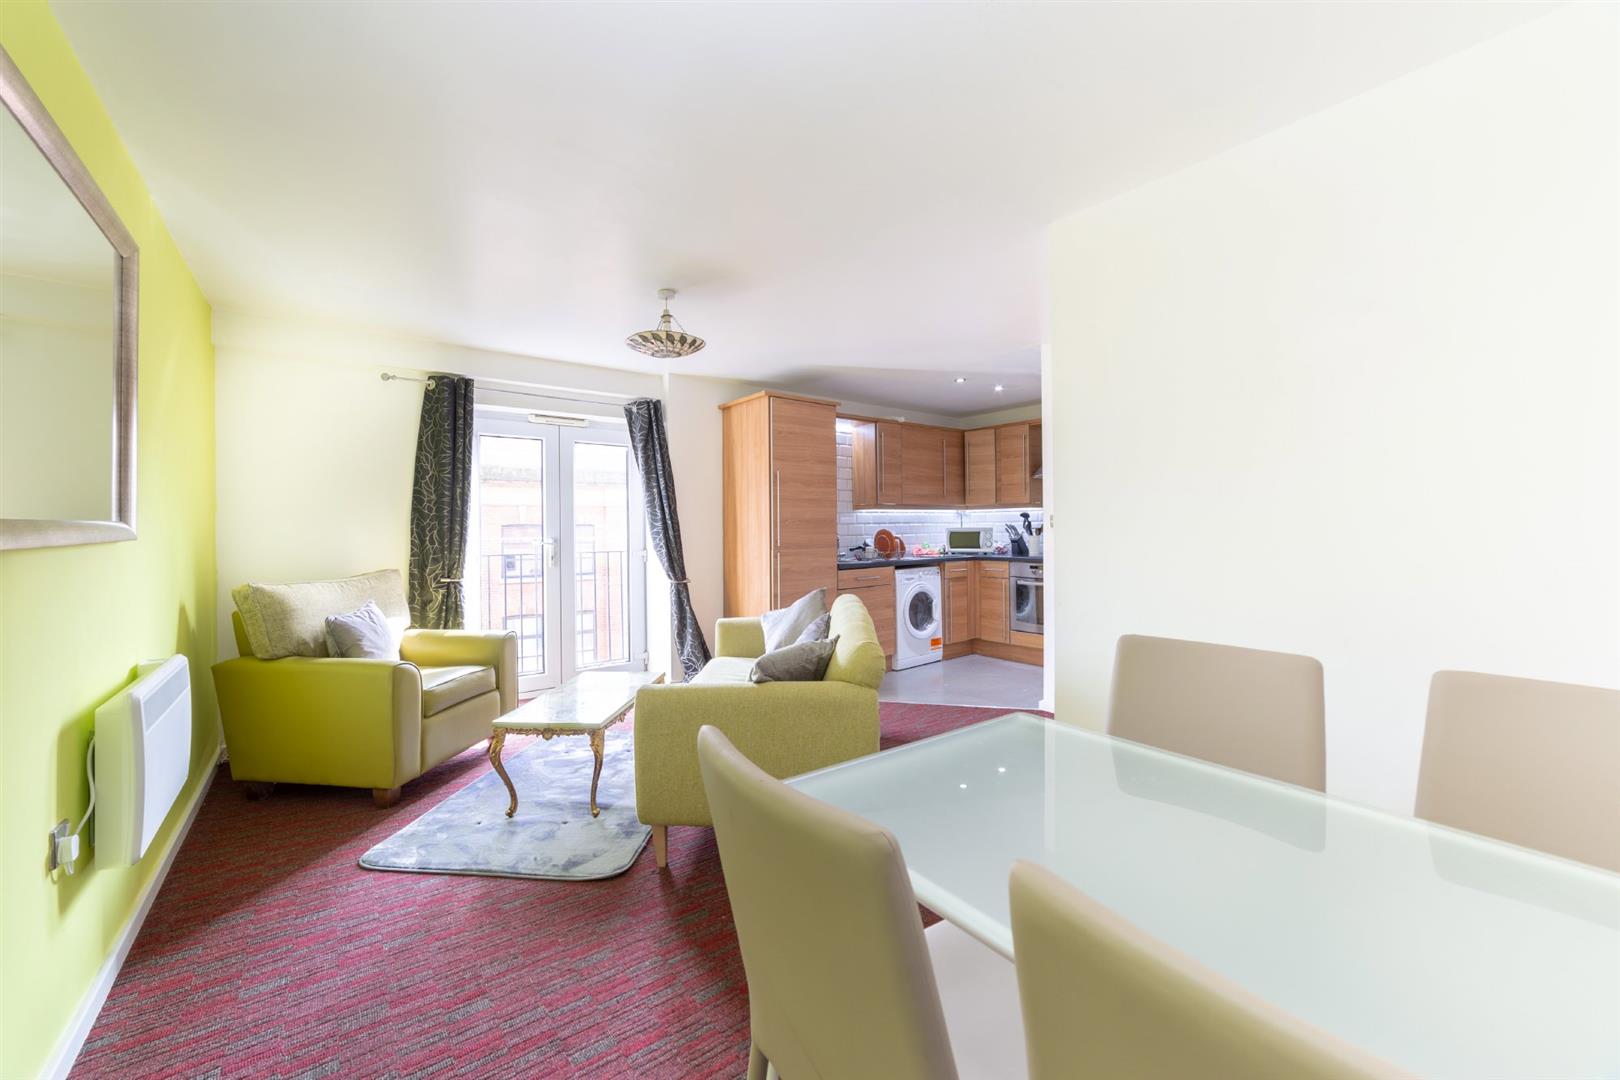 3 bed apartment to rent in Rialto Building, City Centre - Property Image 1